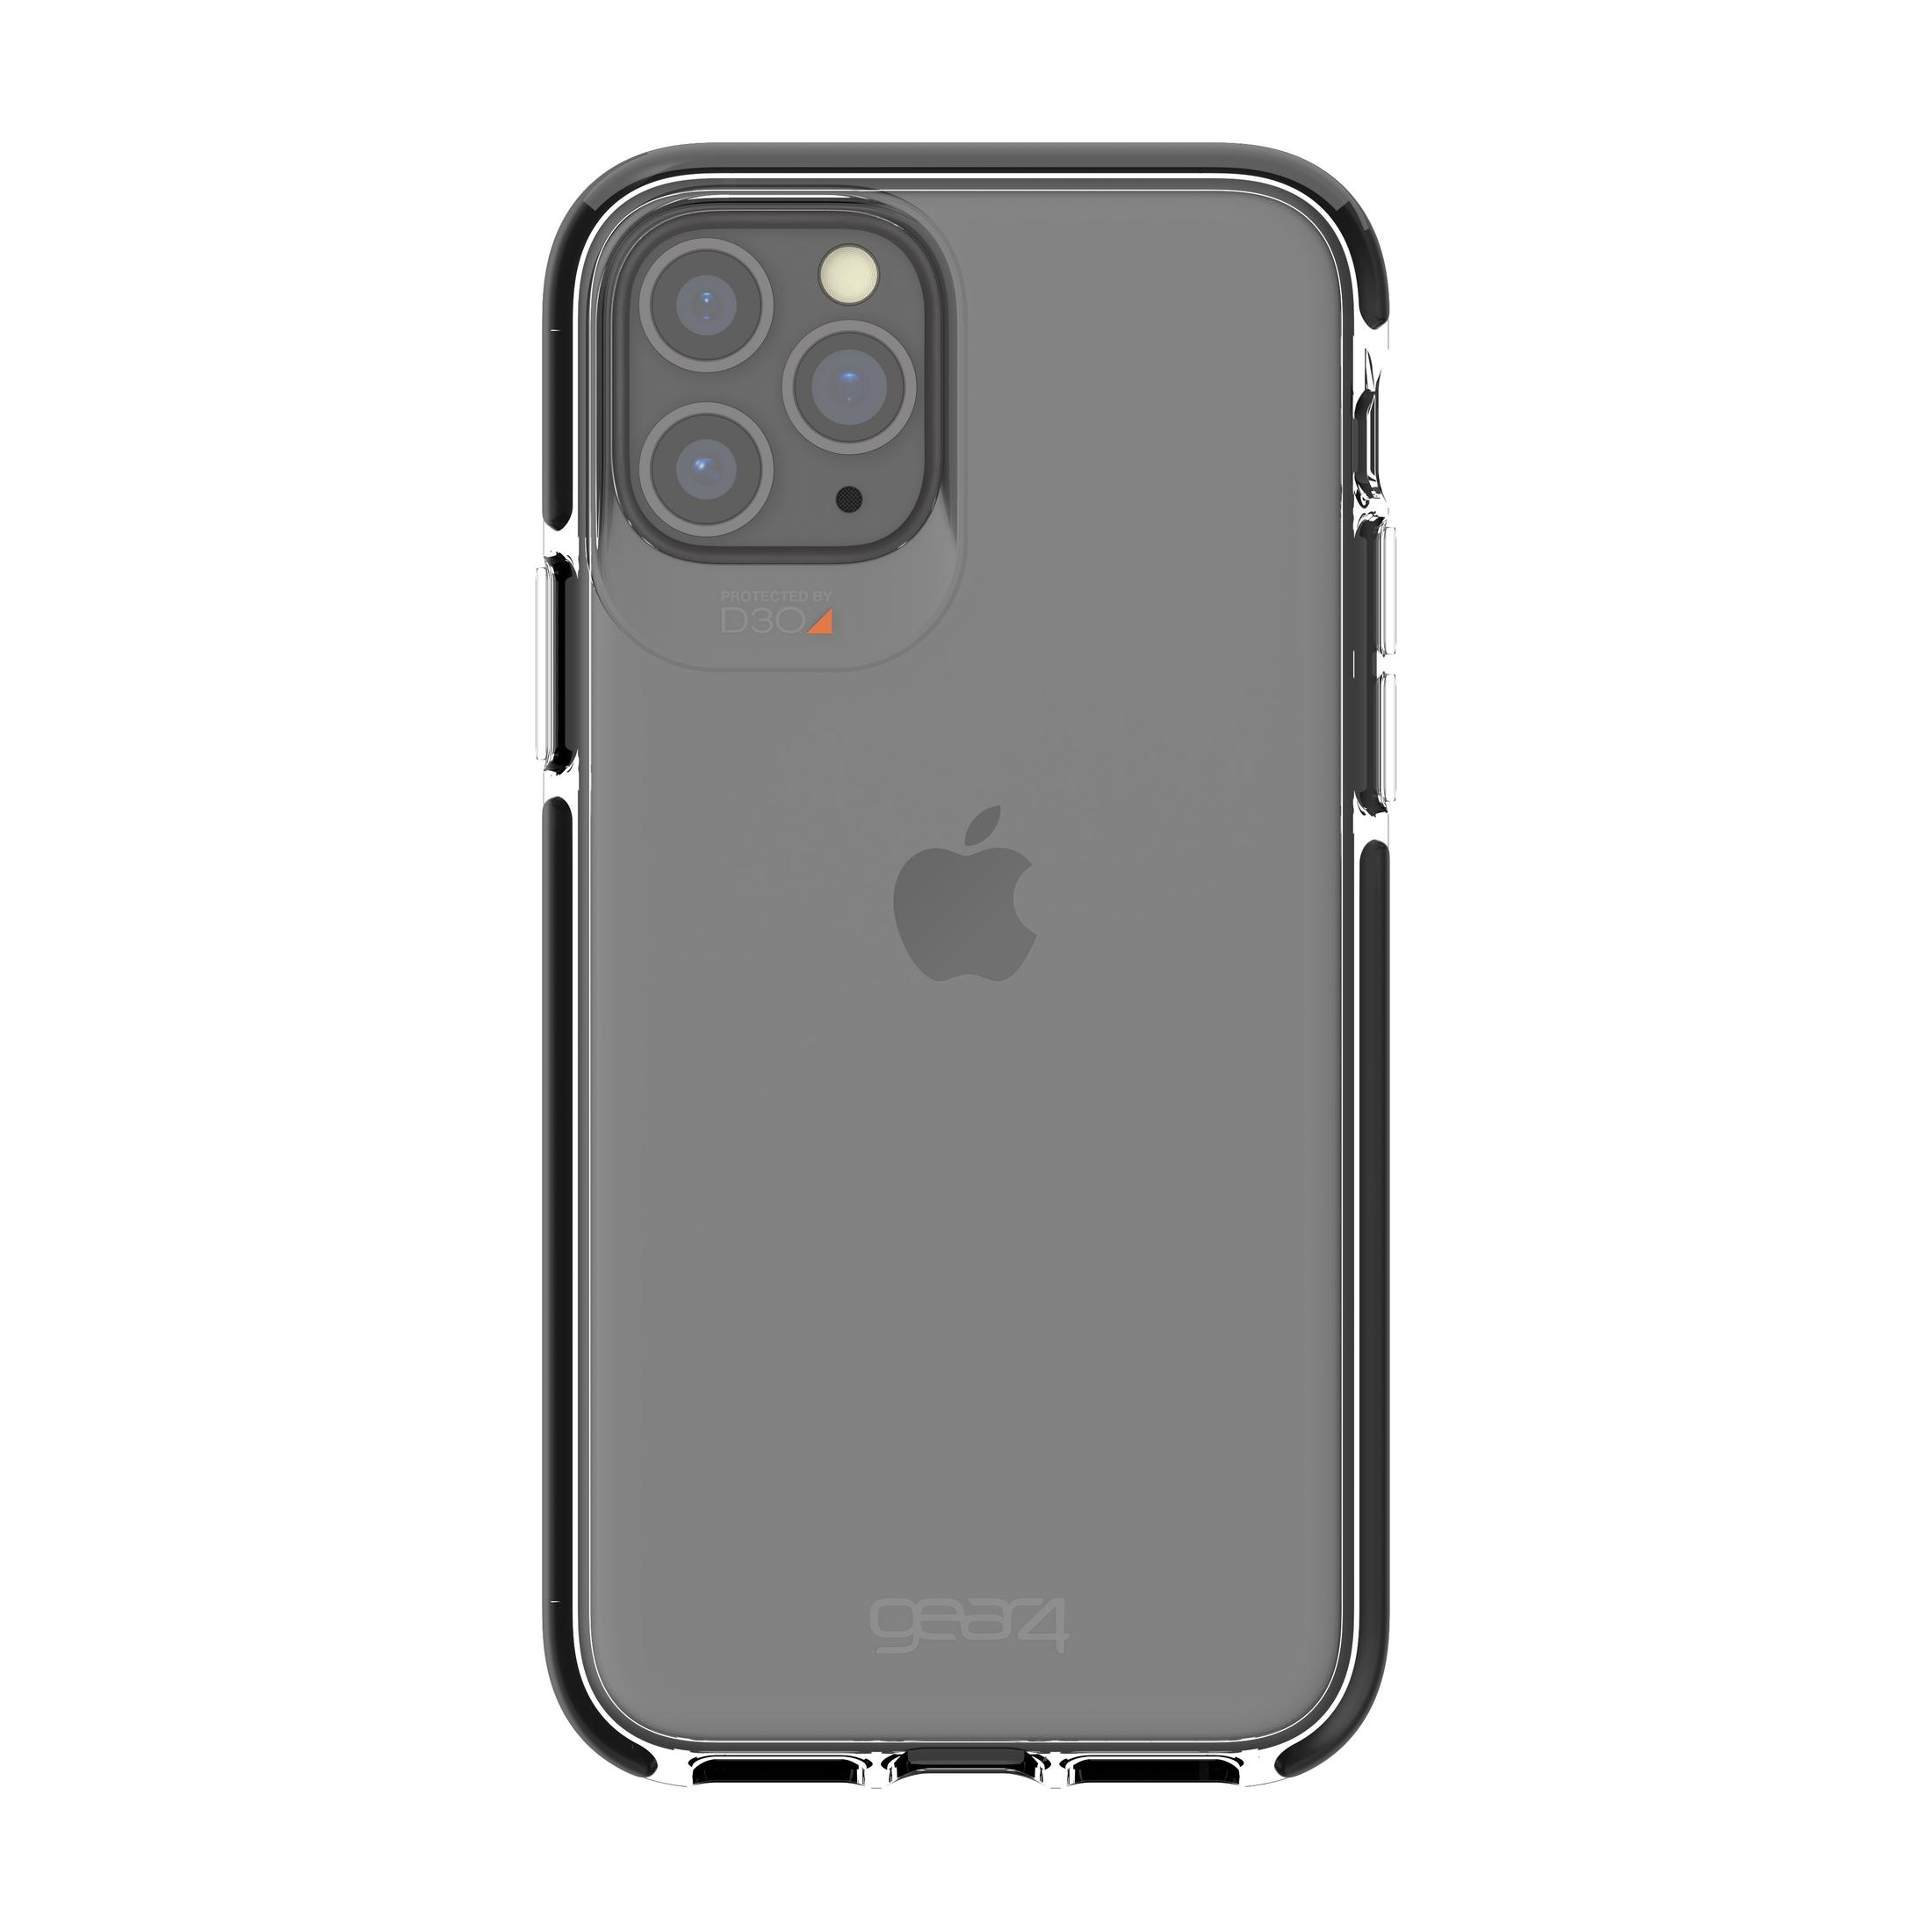 0S32919 Backcover, IPHONE iPhone PRO (BLACK), 11 Schwarz Apple, PICCADILLY GEAR4 11 Pro,